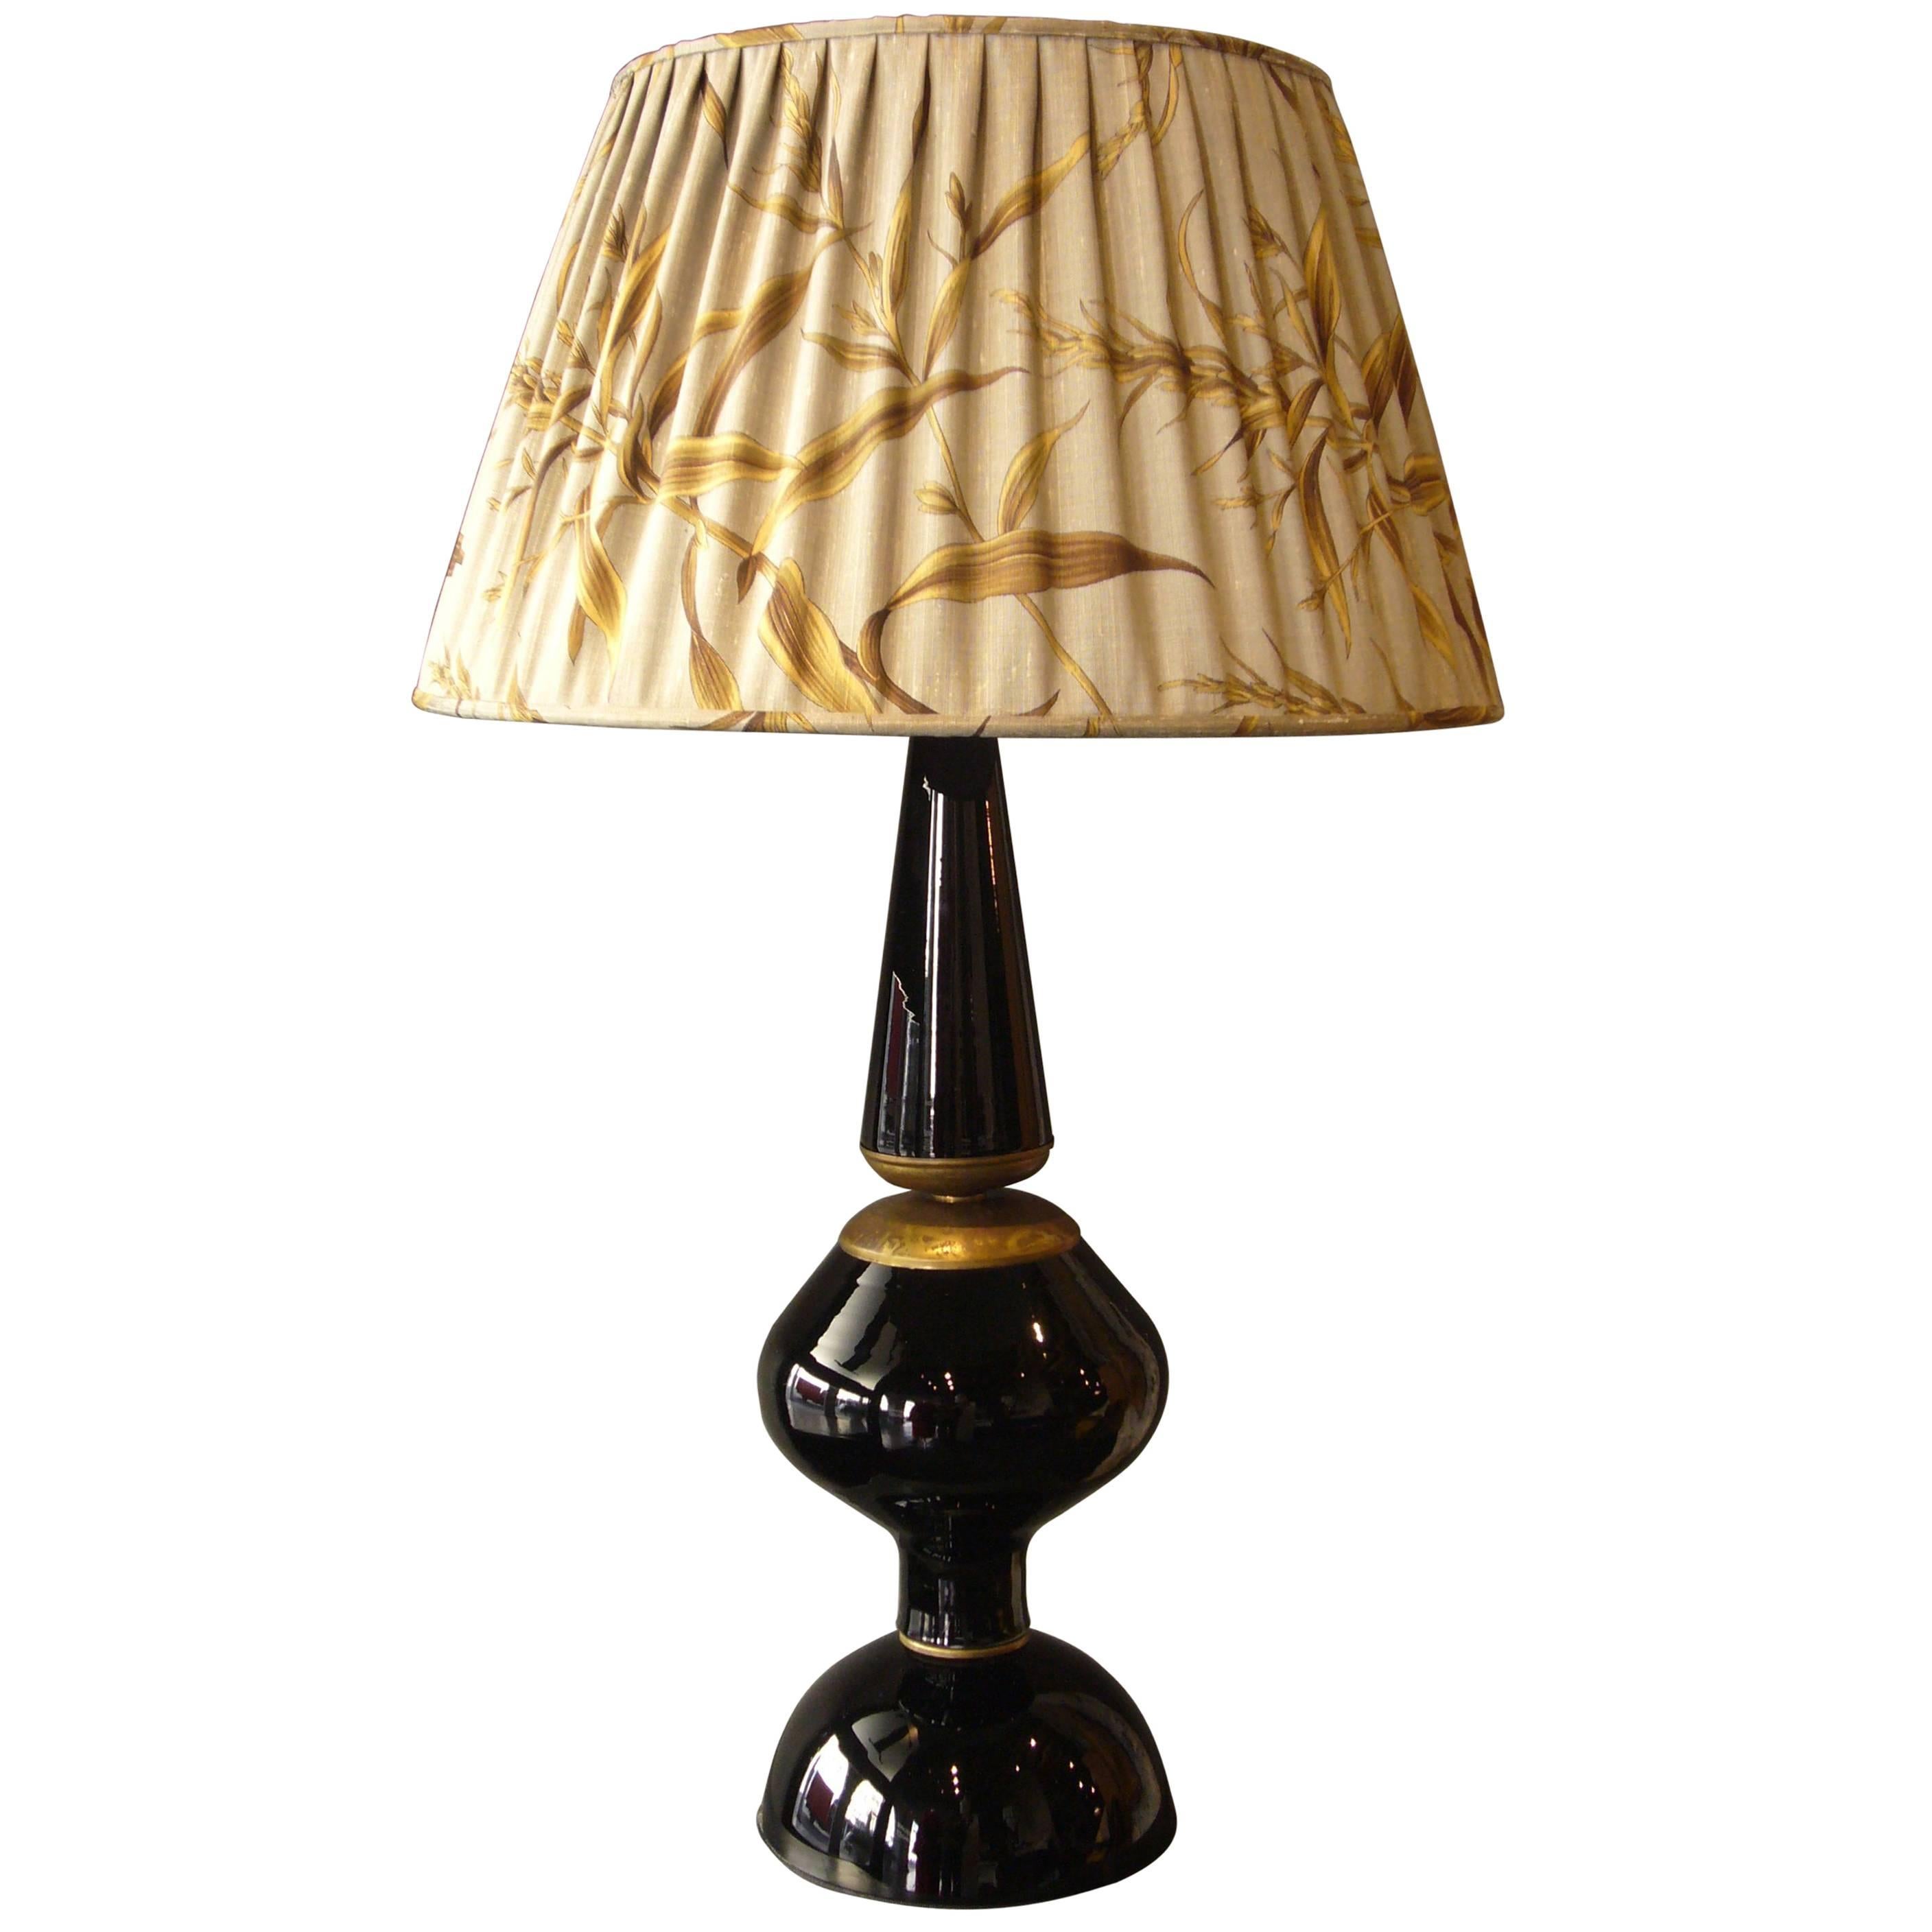 Vintage Handblown Glass Table Lamp Muranovenice Italy Silk Lampshade For Sale